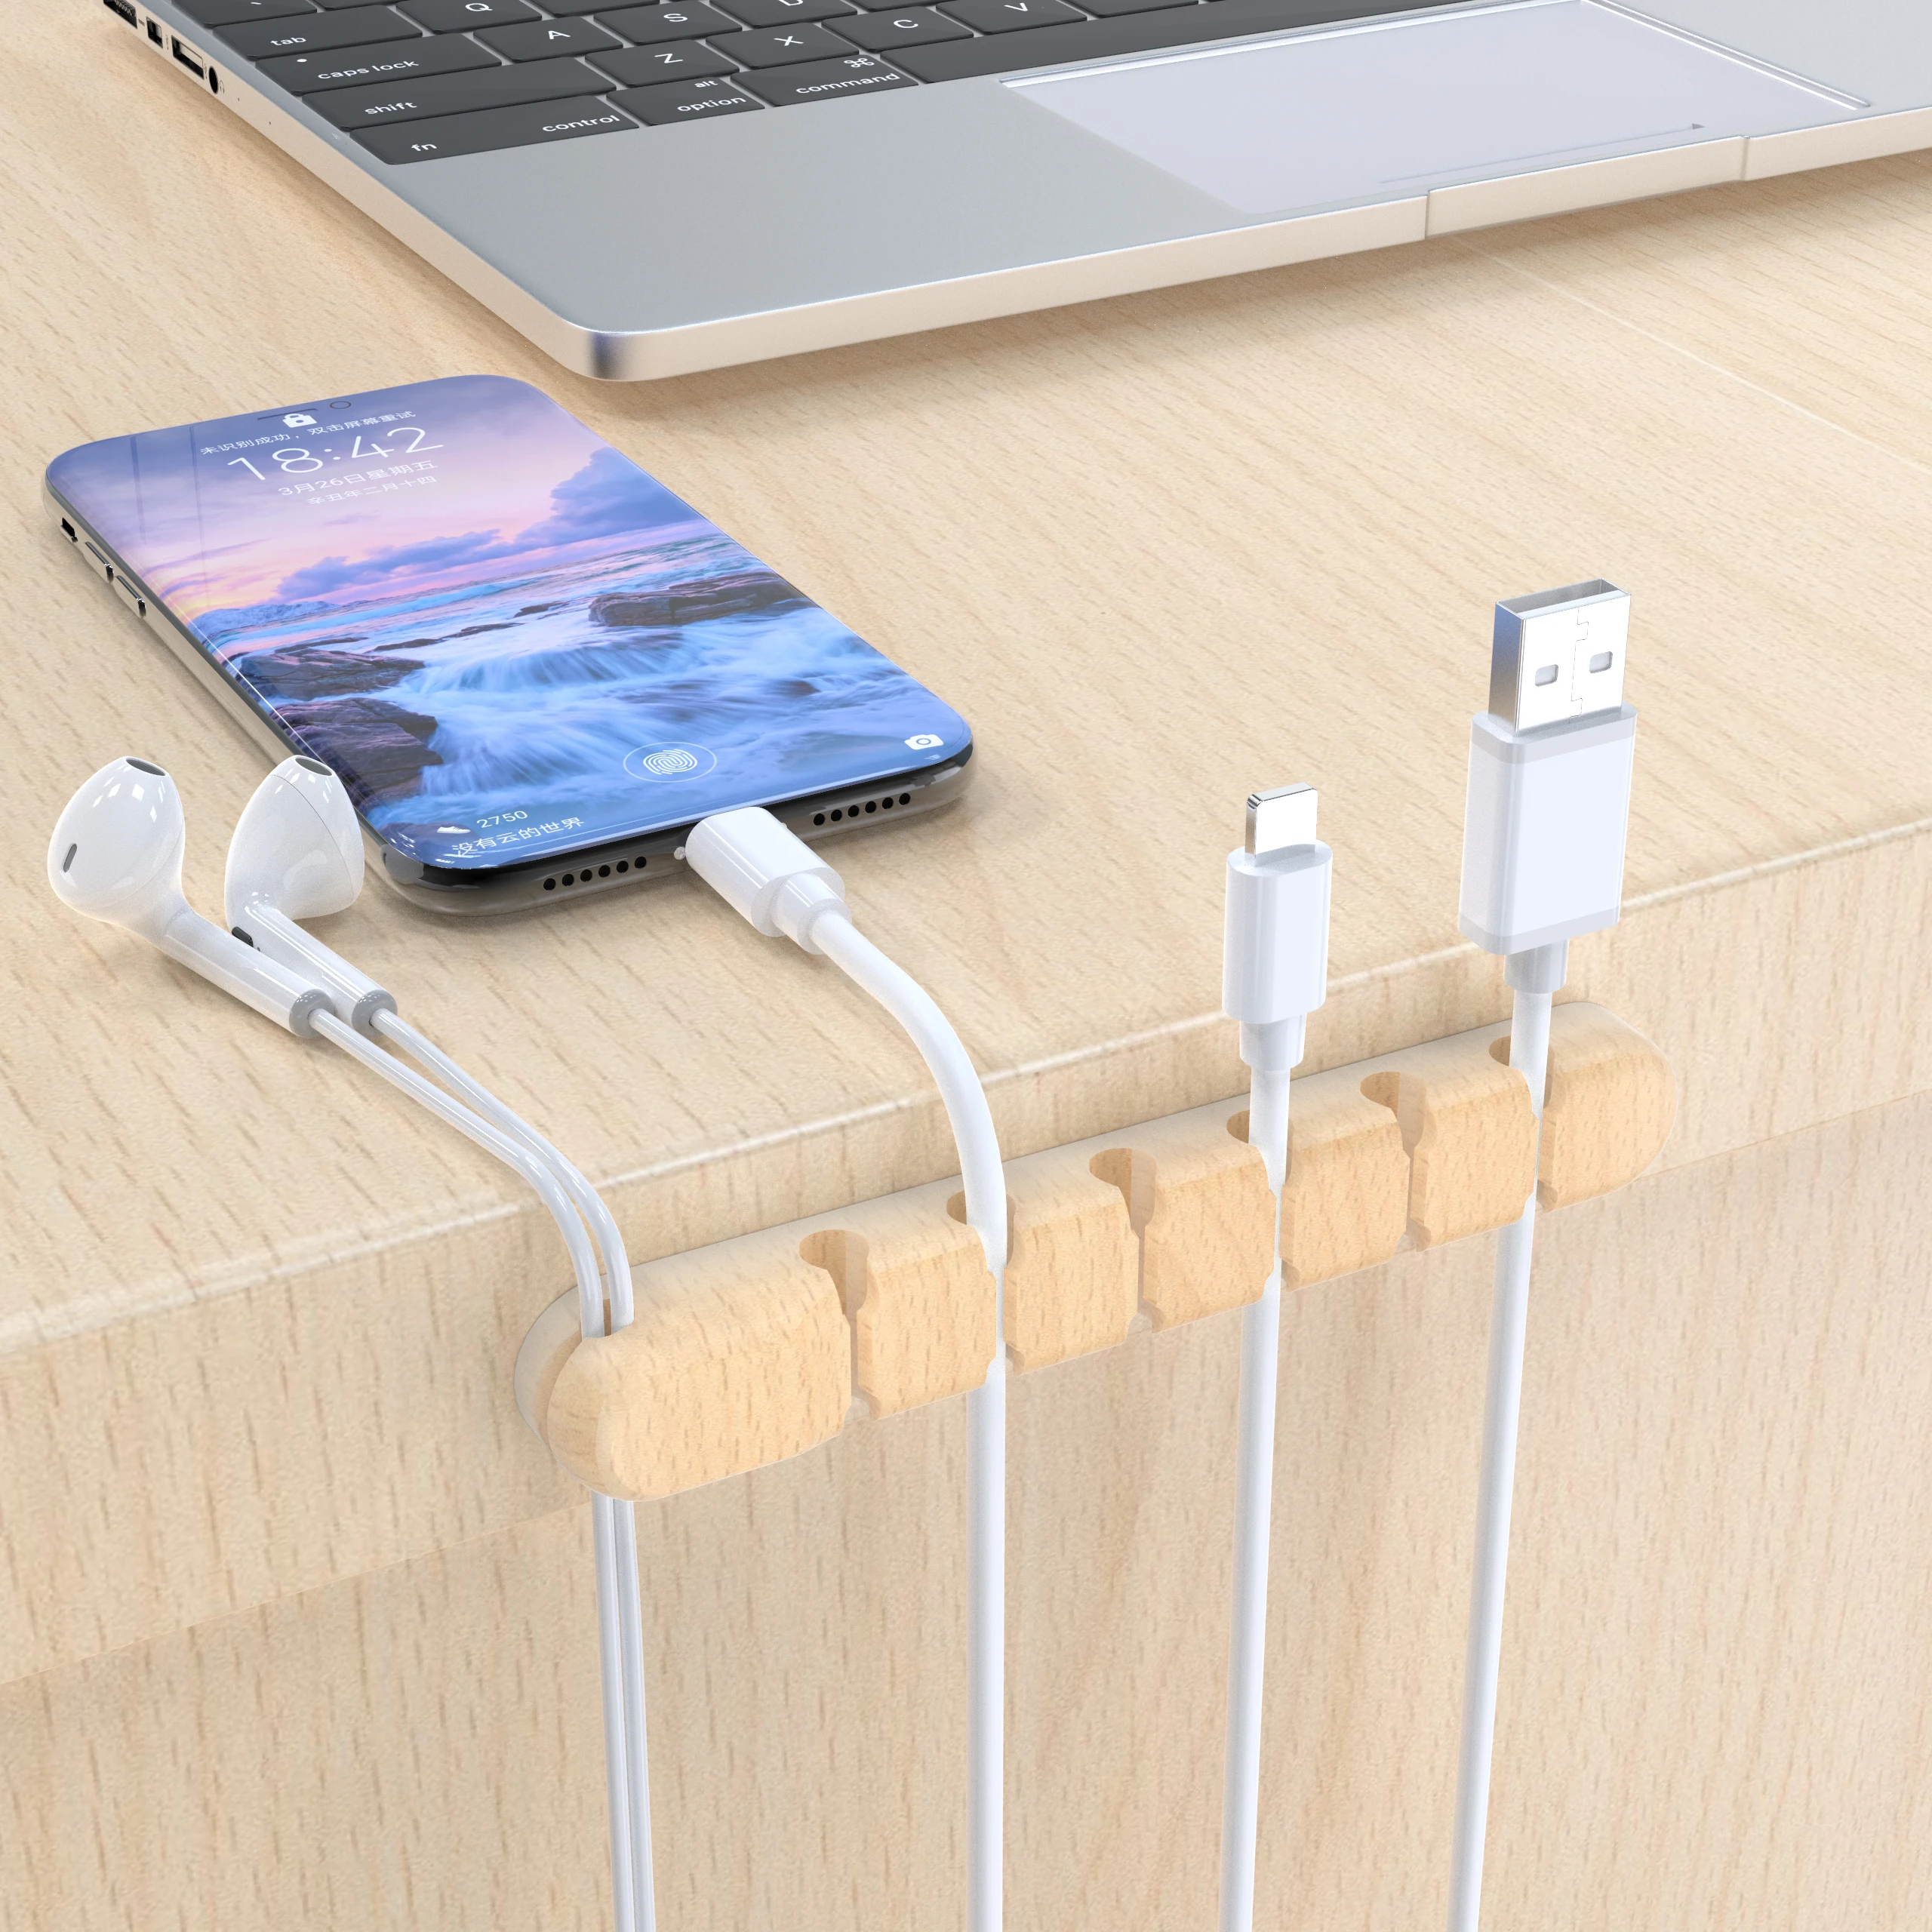 

Office wire clips silicone usb cable cord clip 8 5 holder USB cable wooden desk cable management organizer, Black/white/dark-blue/wood-color